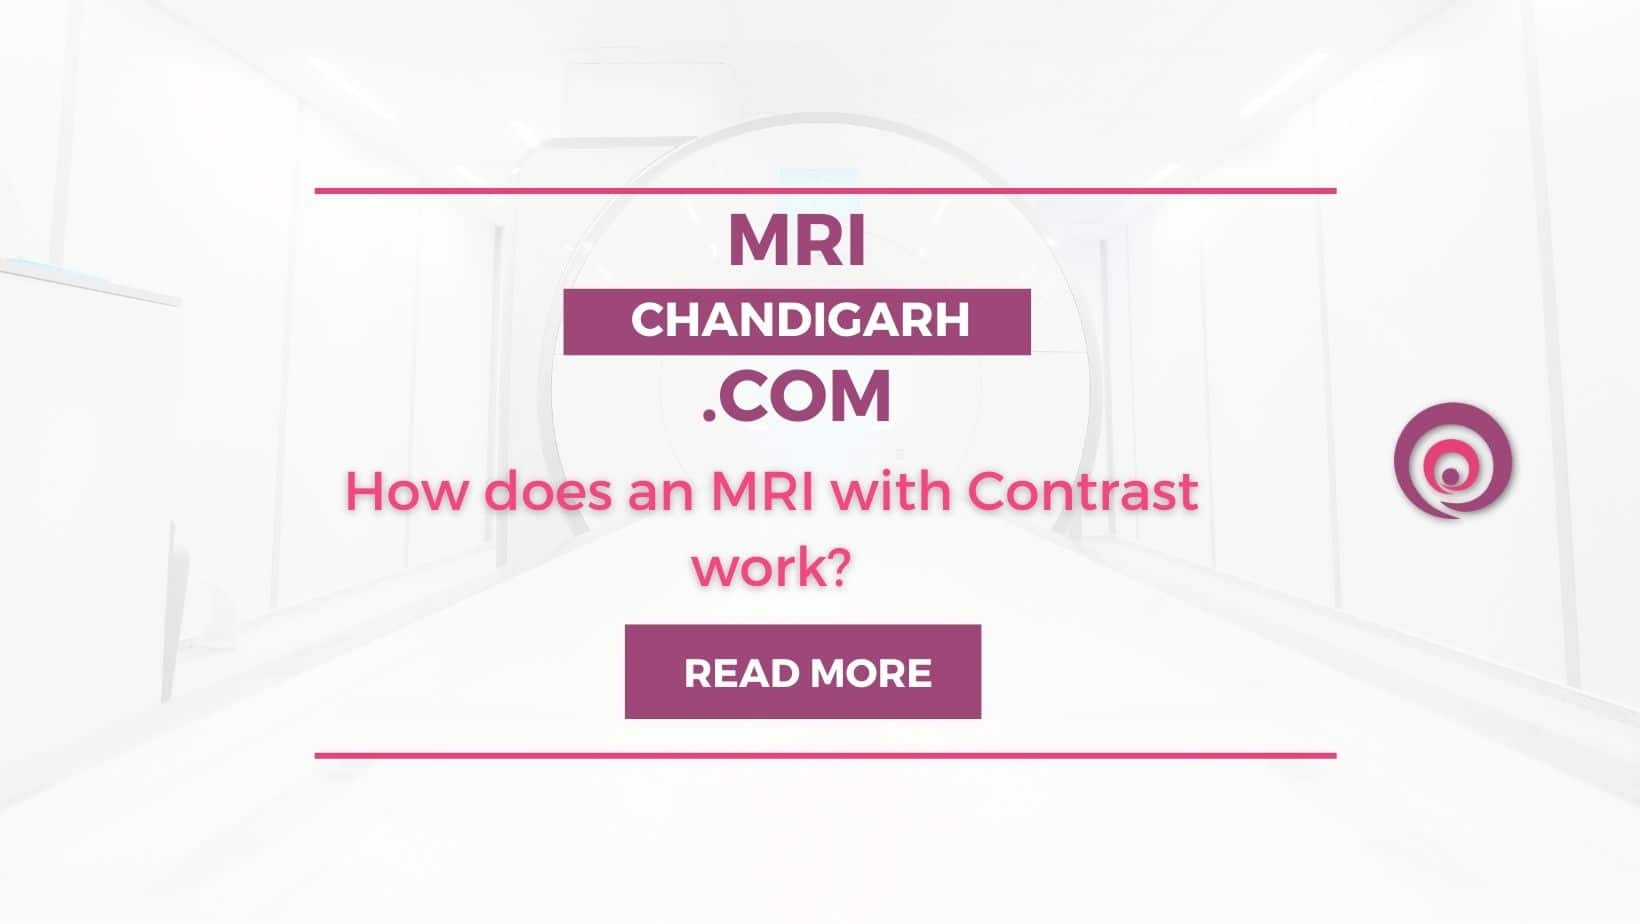 How does an MRI with Contrast work?